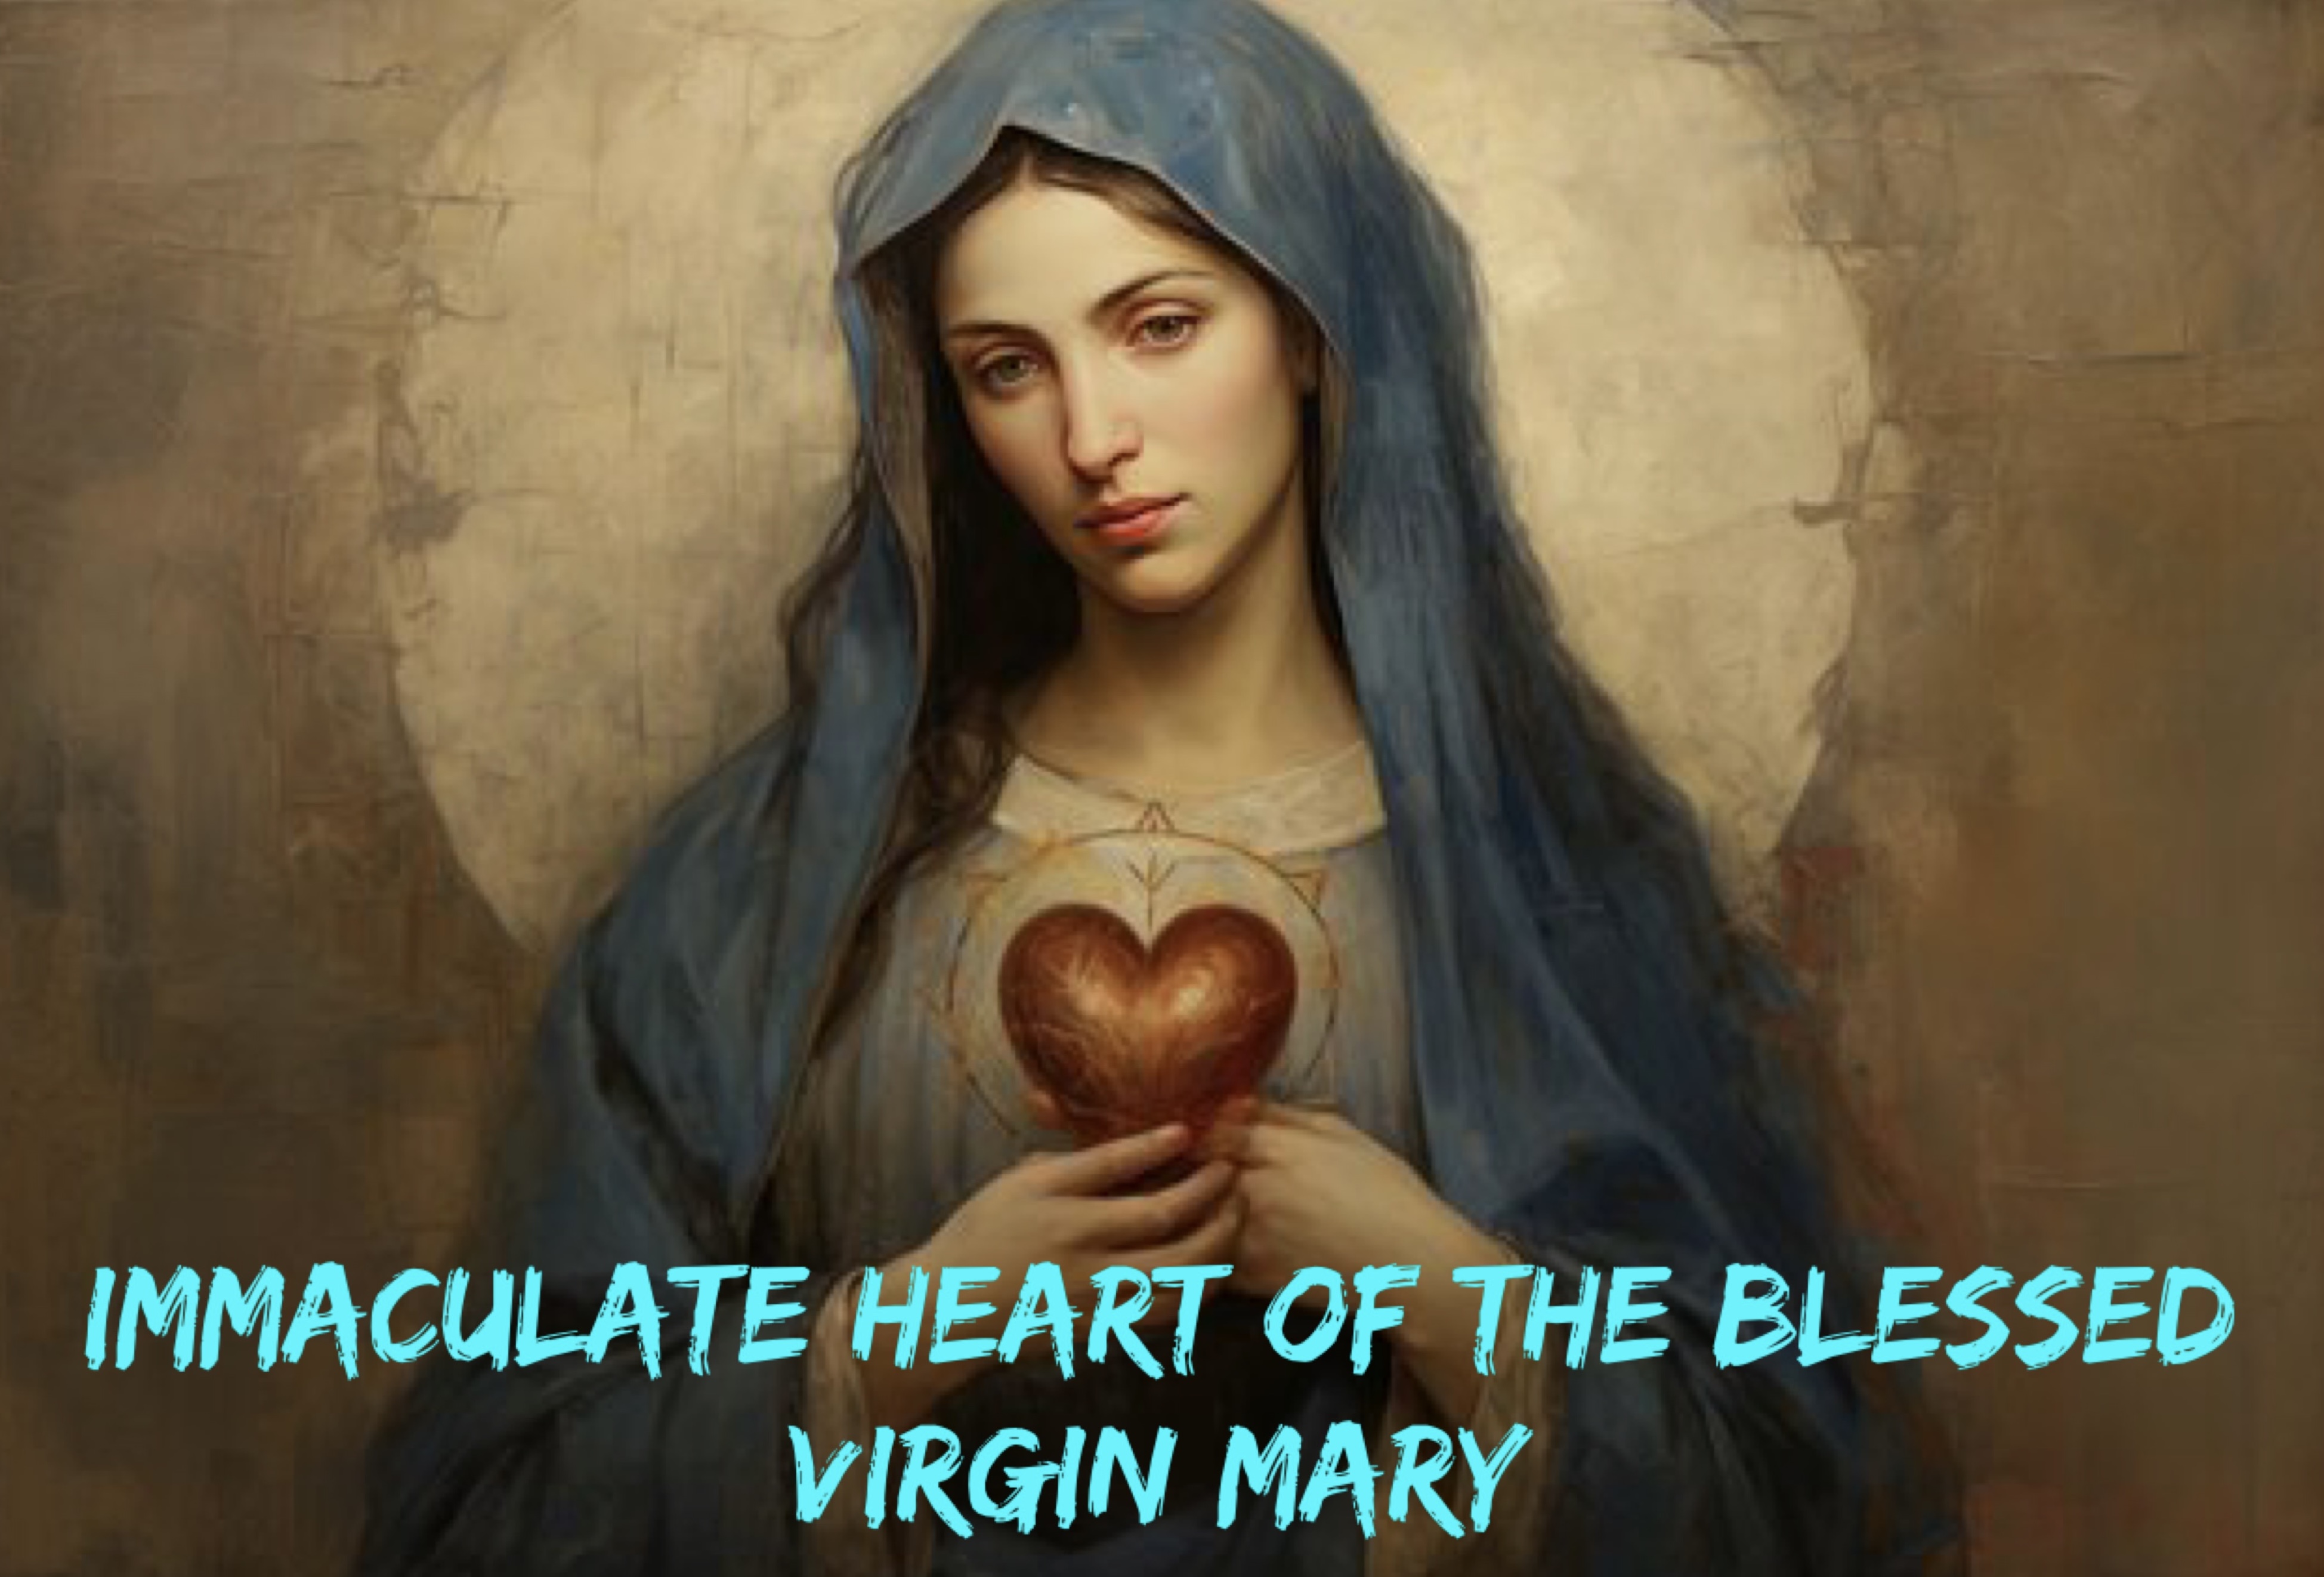 8th June – Immaculate Heart of the Blessed Virgin Mary